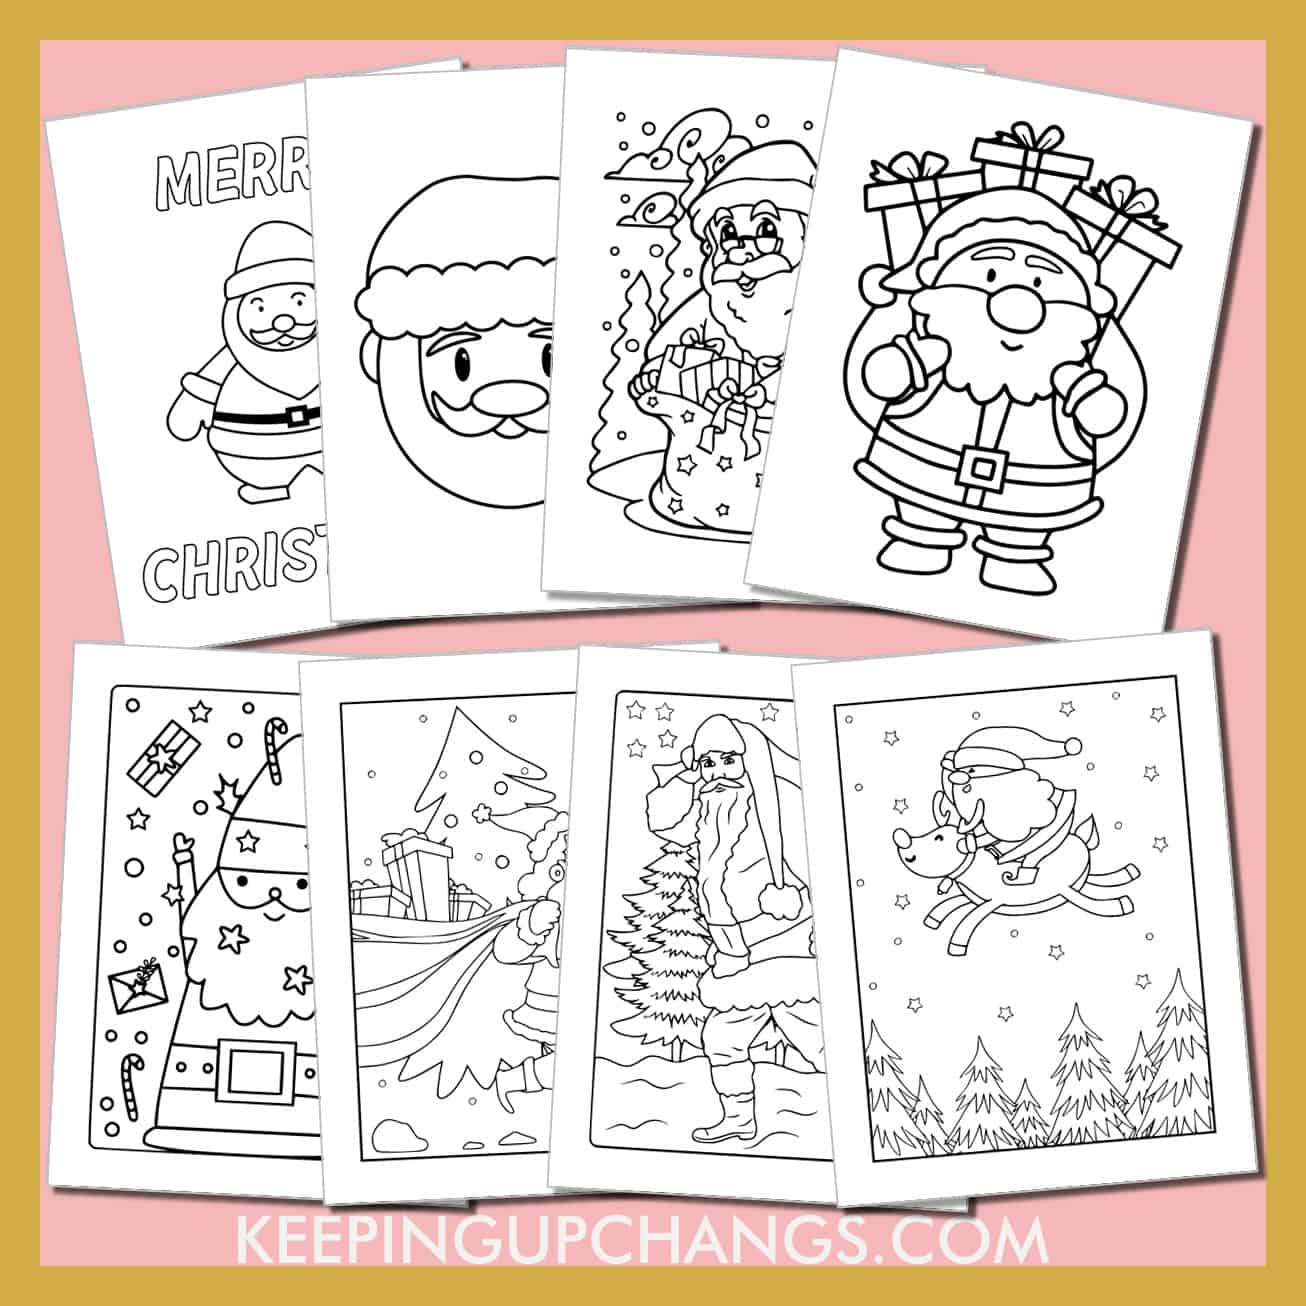 santa colouring sheets including hello kitty, snowman, rudolph reindeer, tree, mrs. claus, and more.